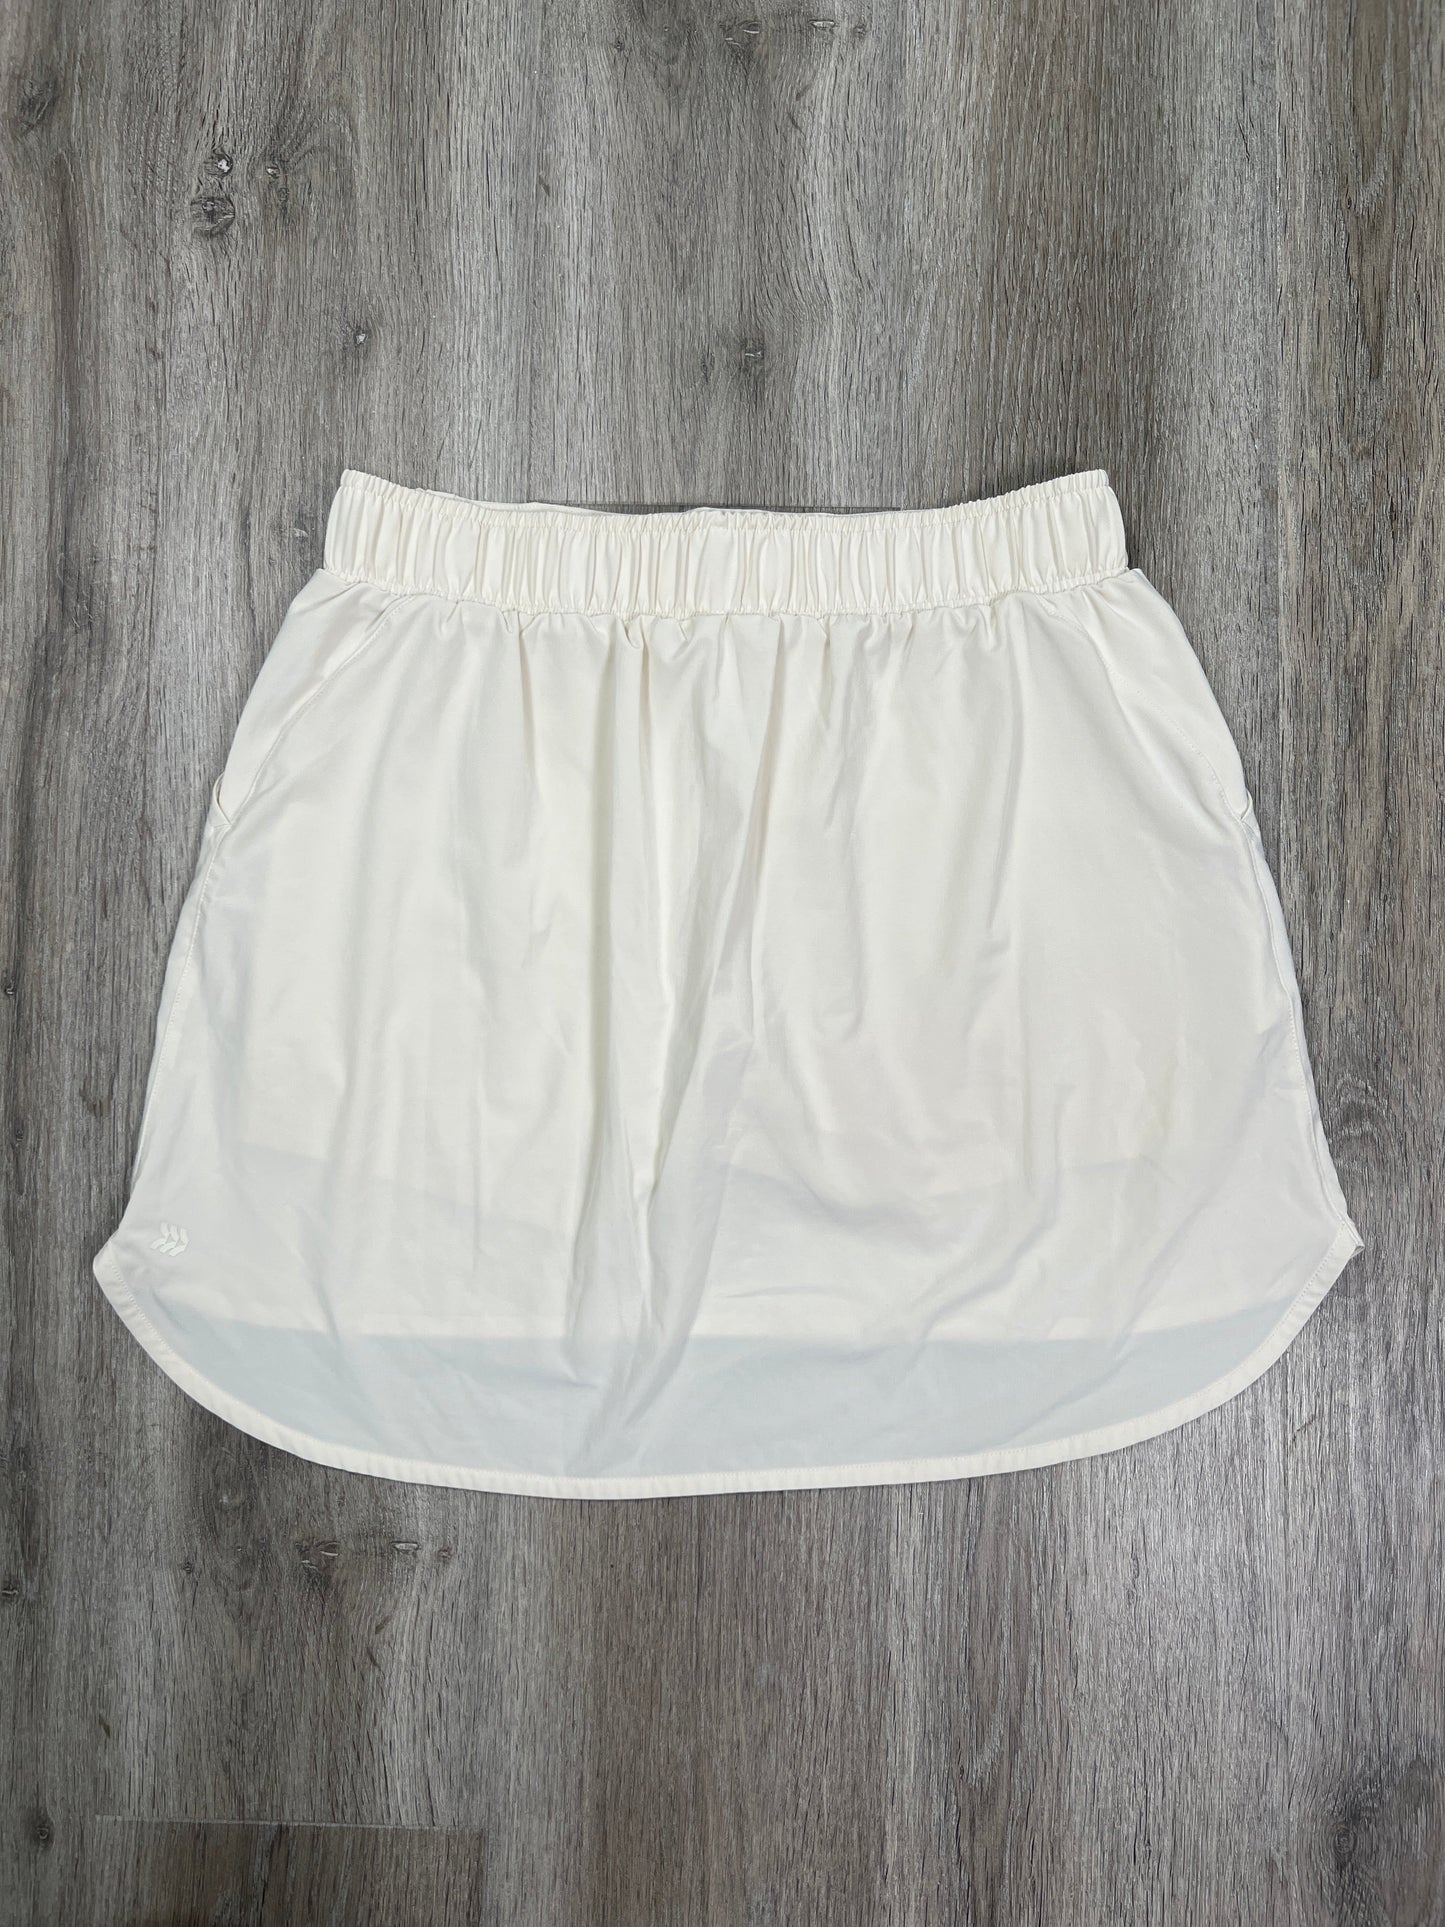 Athletic Skort By All In Motion  Size: M